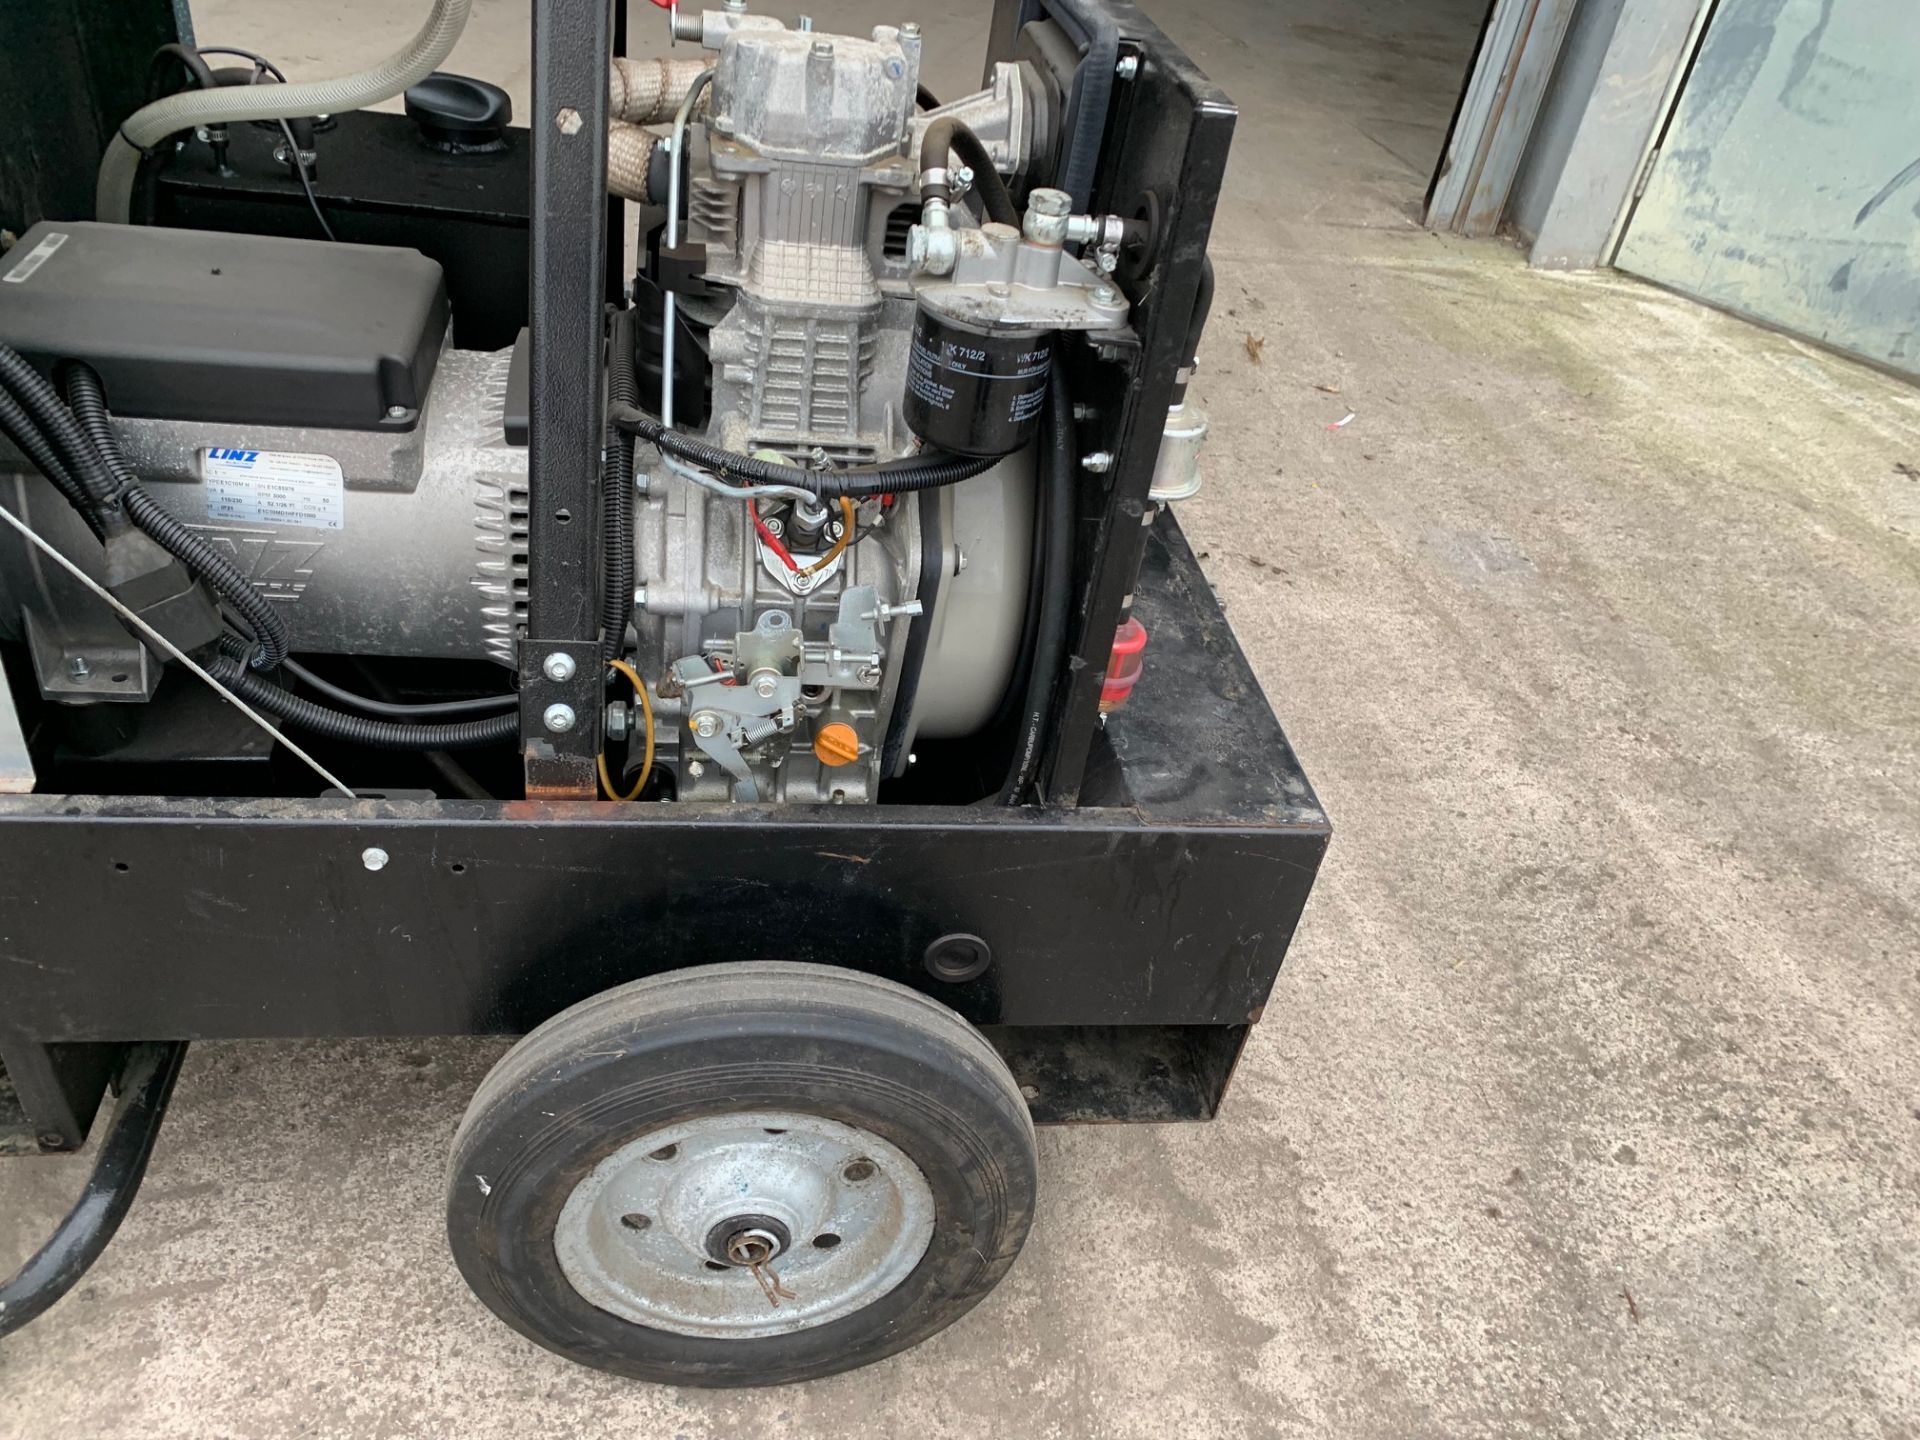 MGTP 6000 SS-Y GENERATOR, 6KvA DIESEL SINGLE PHASE 110/230v WITH 100L YANMAR ENGINE, 85 HOURS - Image 6 of 8